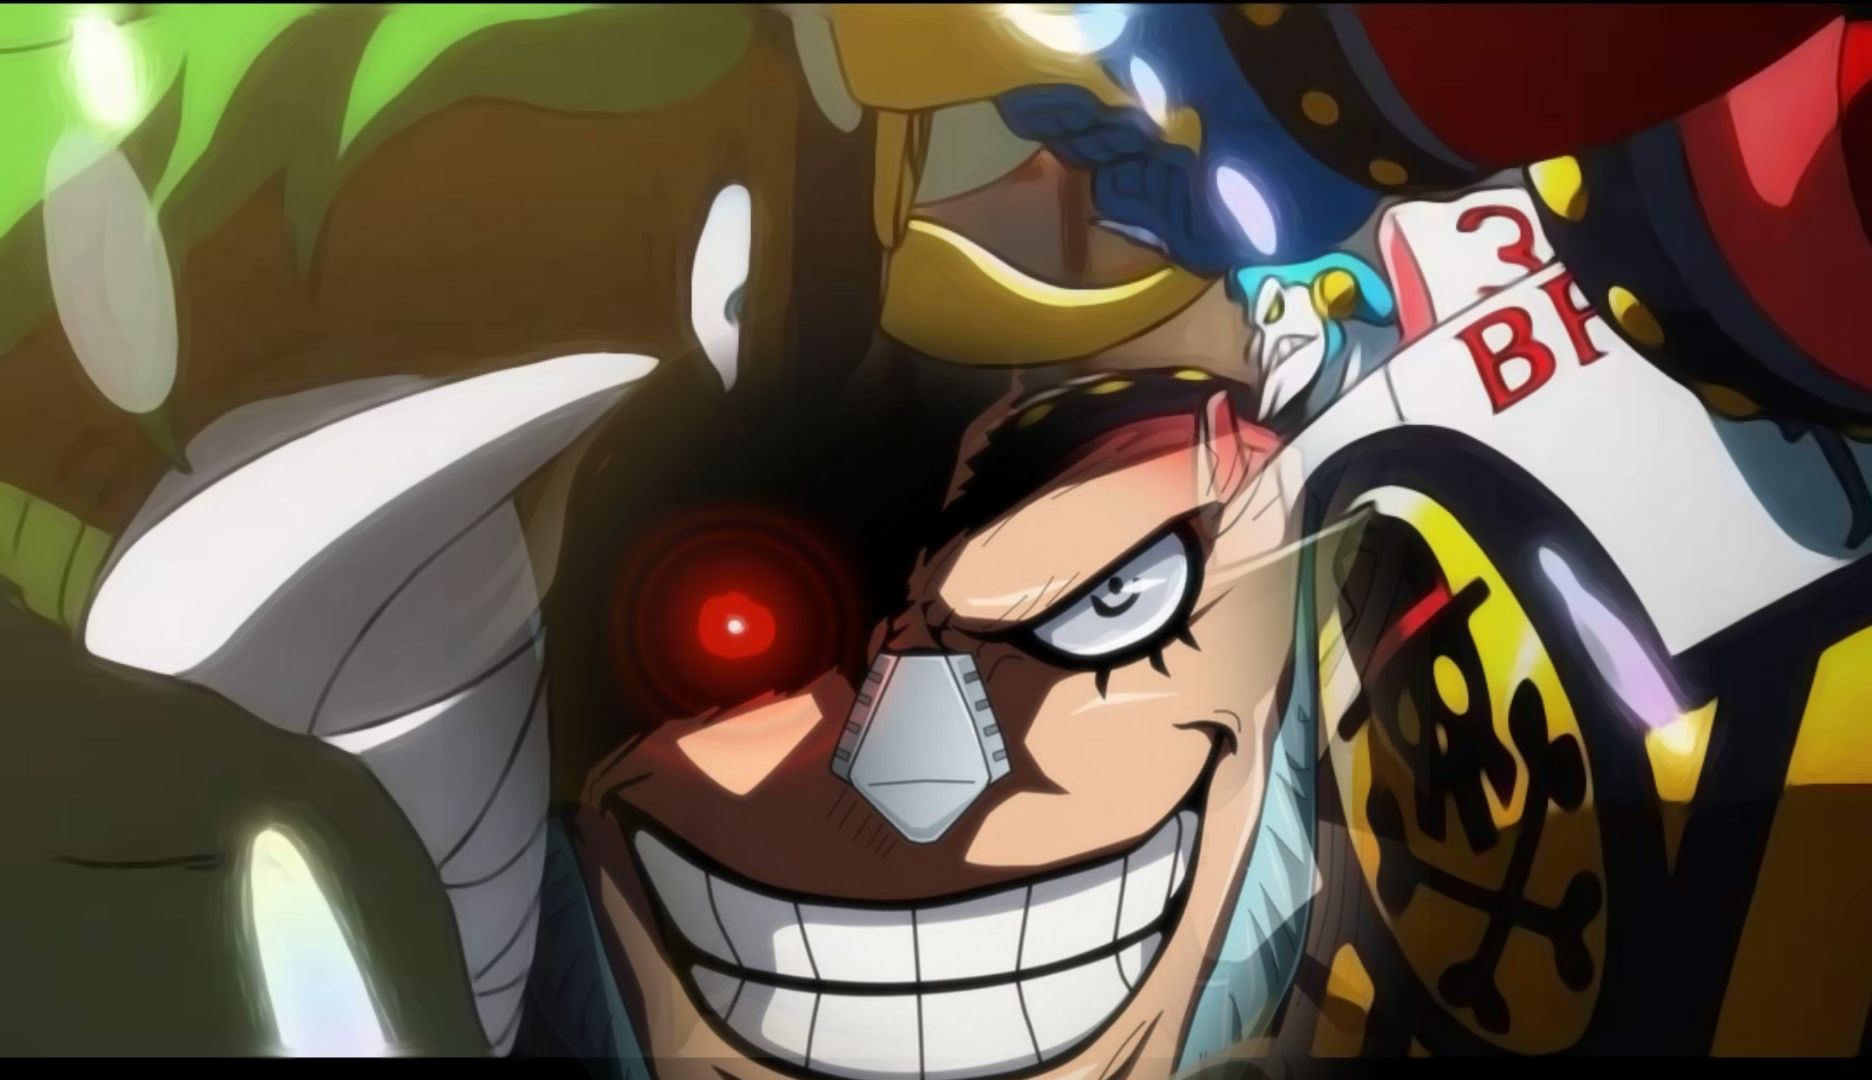 Uncovering the Past, Present, and Future of Franky - The Cyborg One Piece Character